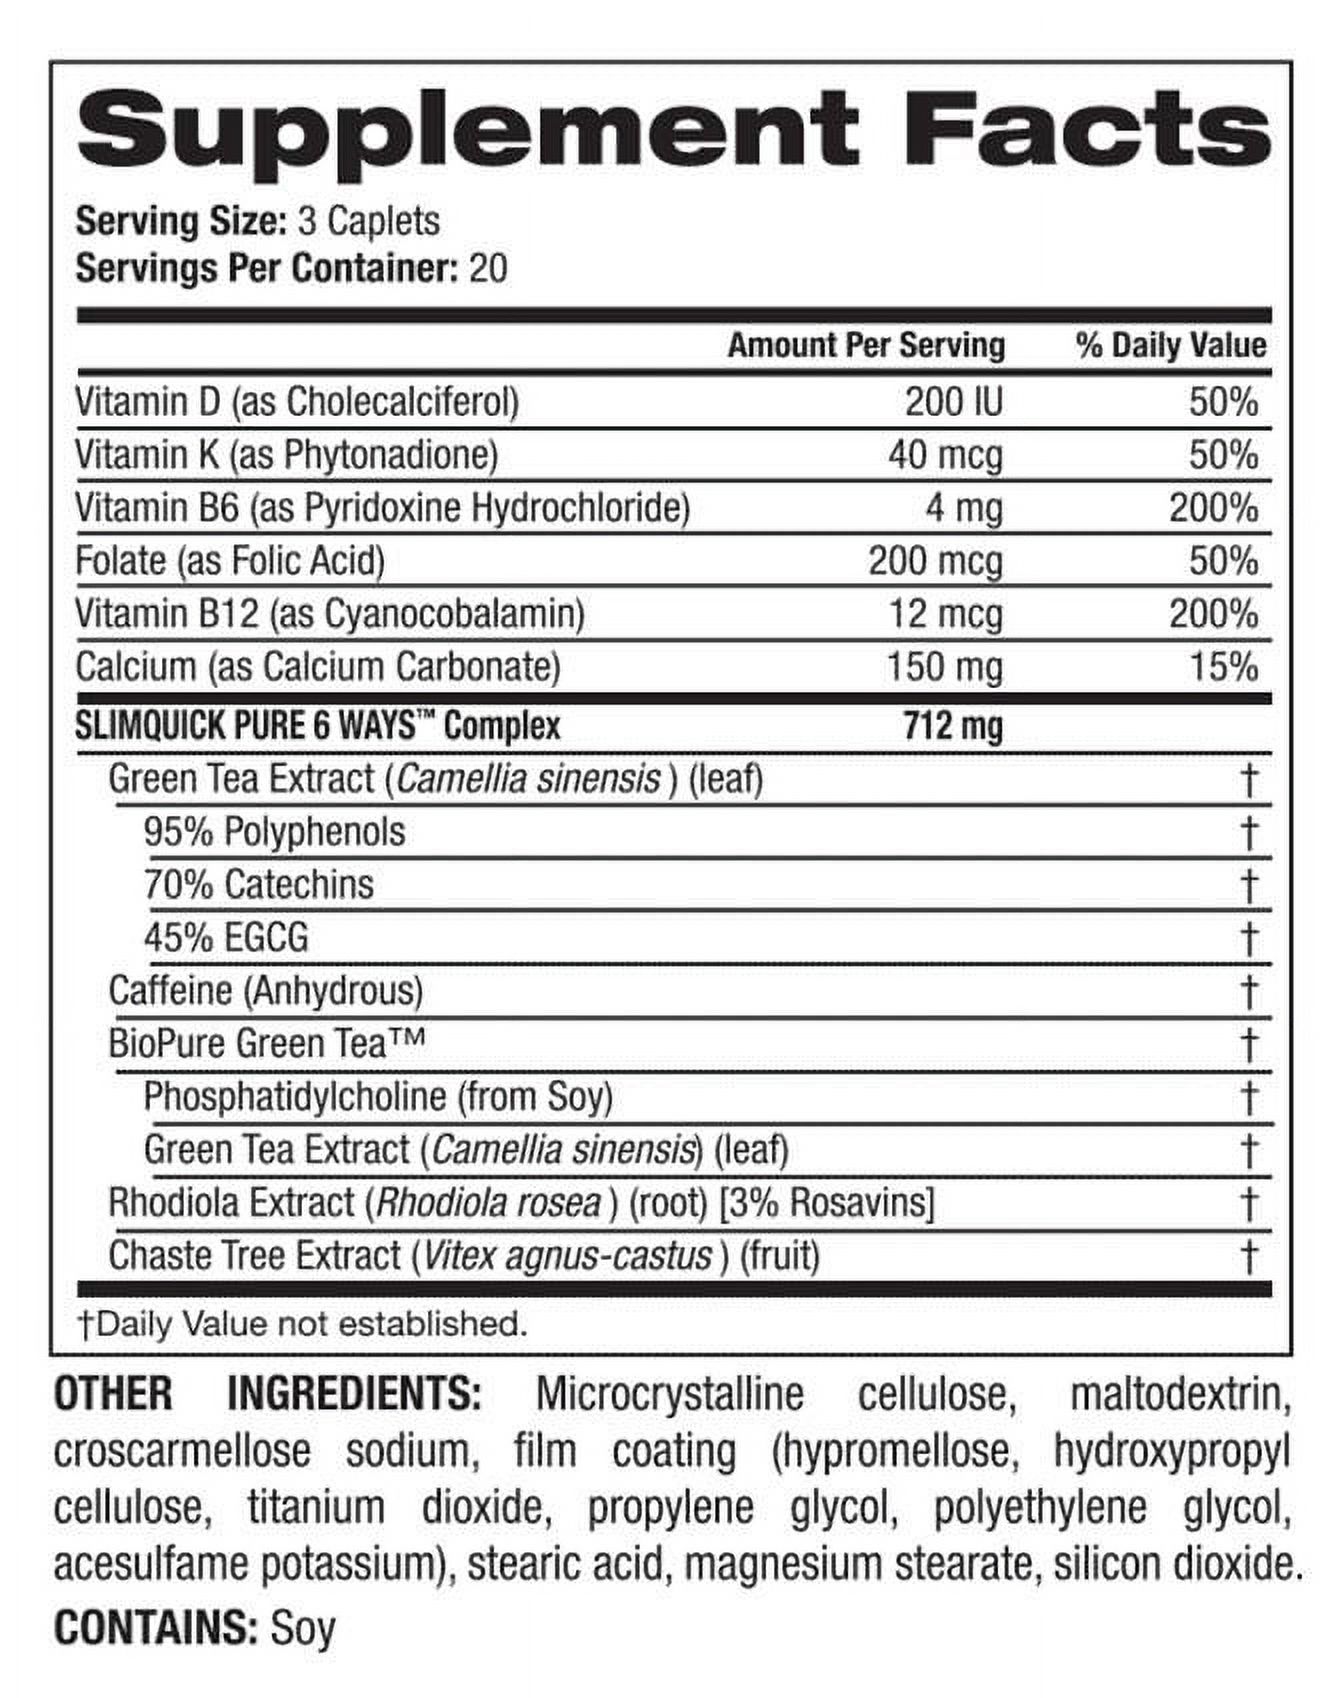 Slimquick Pure Weight Loss For Women Appetite Suppressant & Metabolism Booster Weight Loss, 60 Ct - image 2 of 2